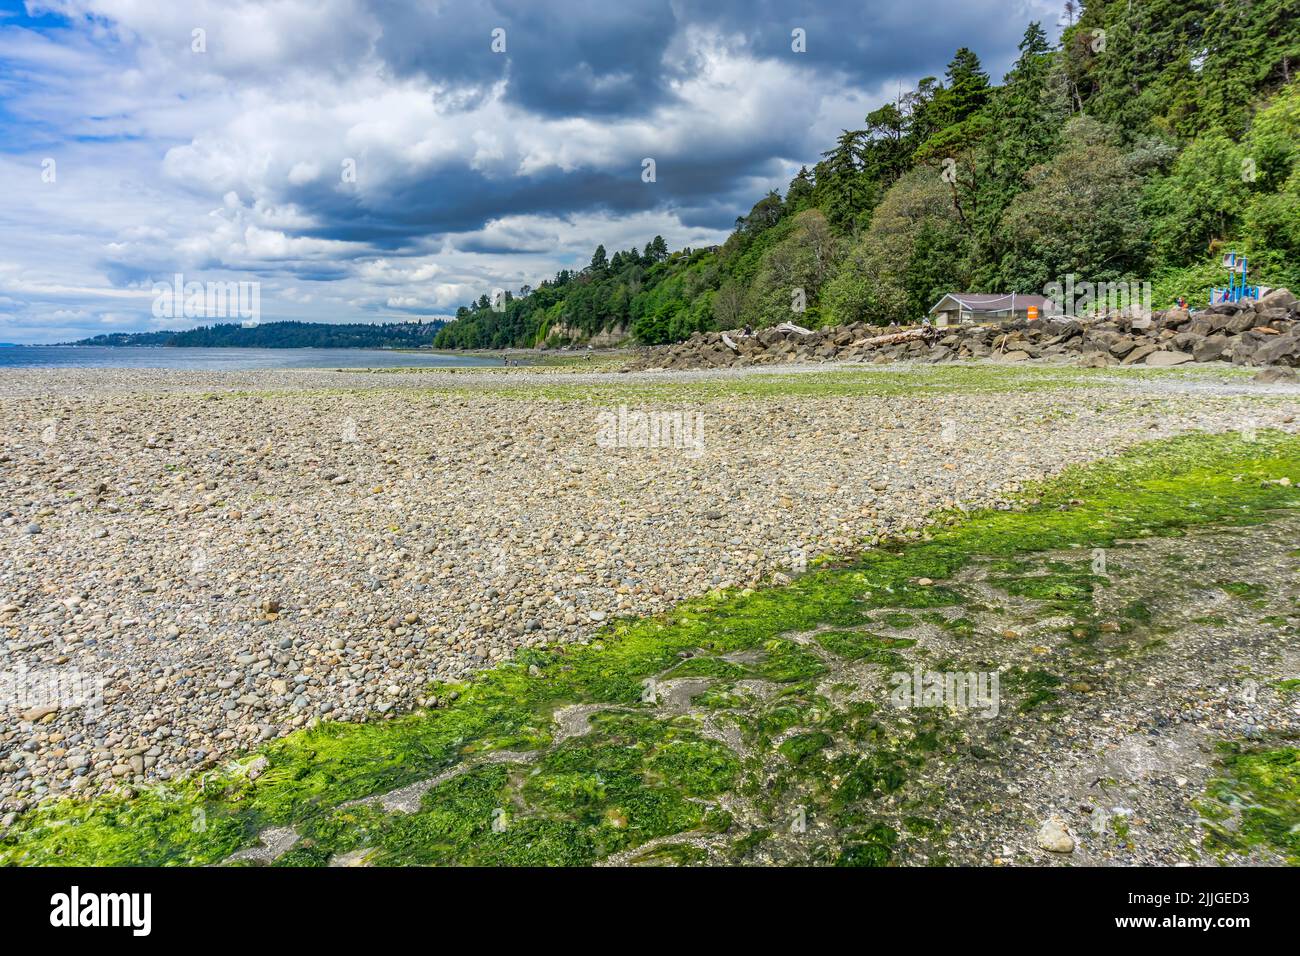 A landscape phot of Saltwater State Park in Des Moines, Washington. Stock Photo